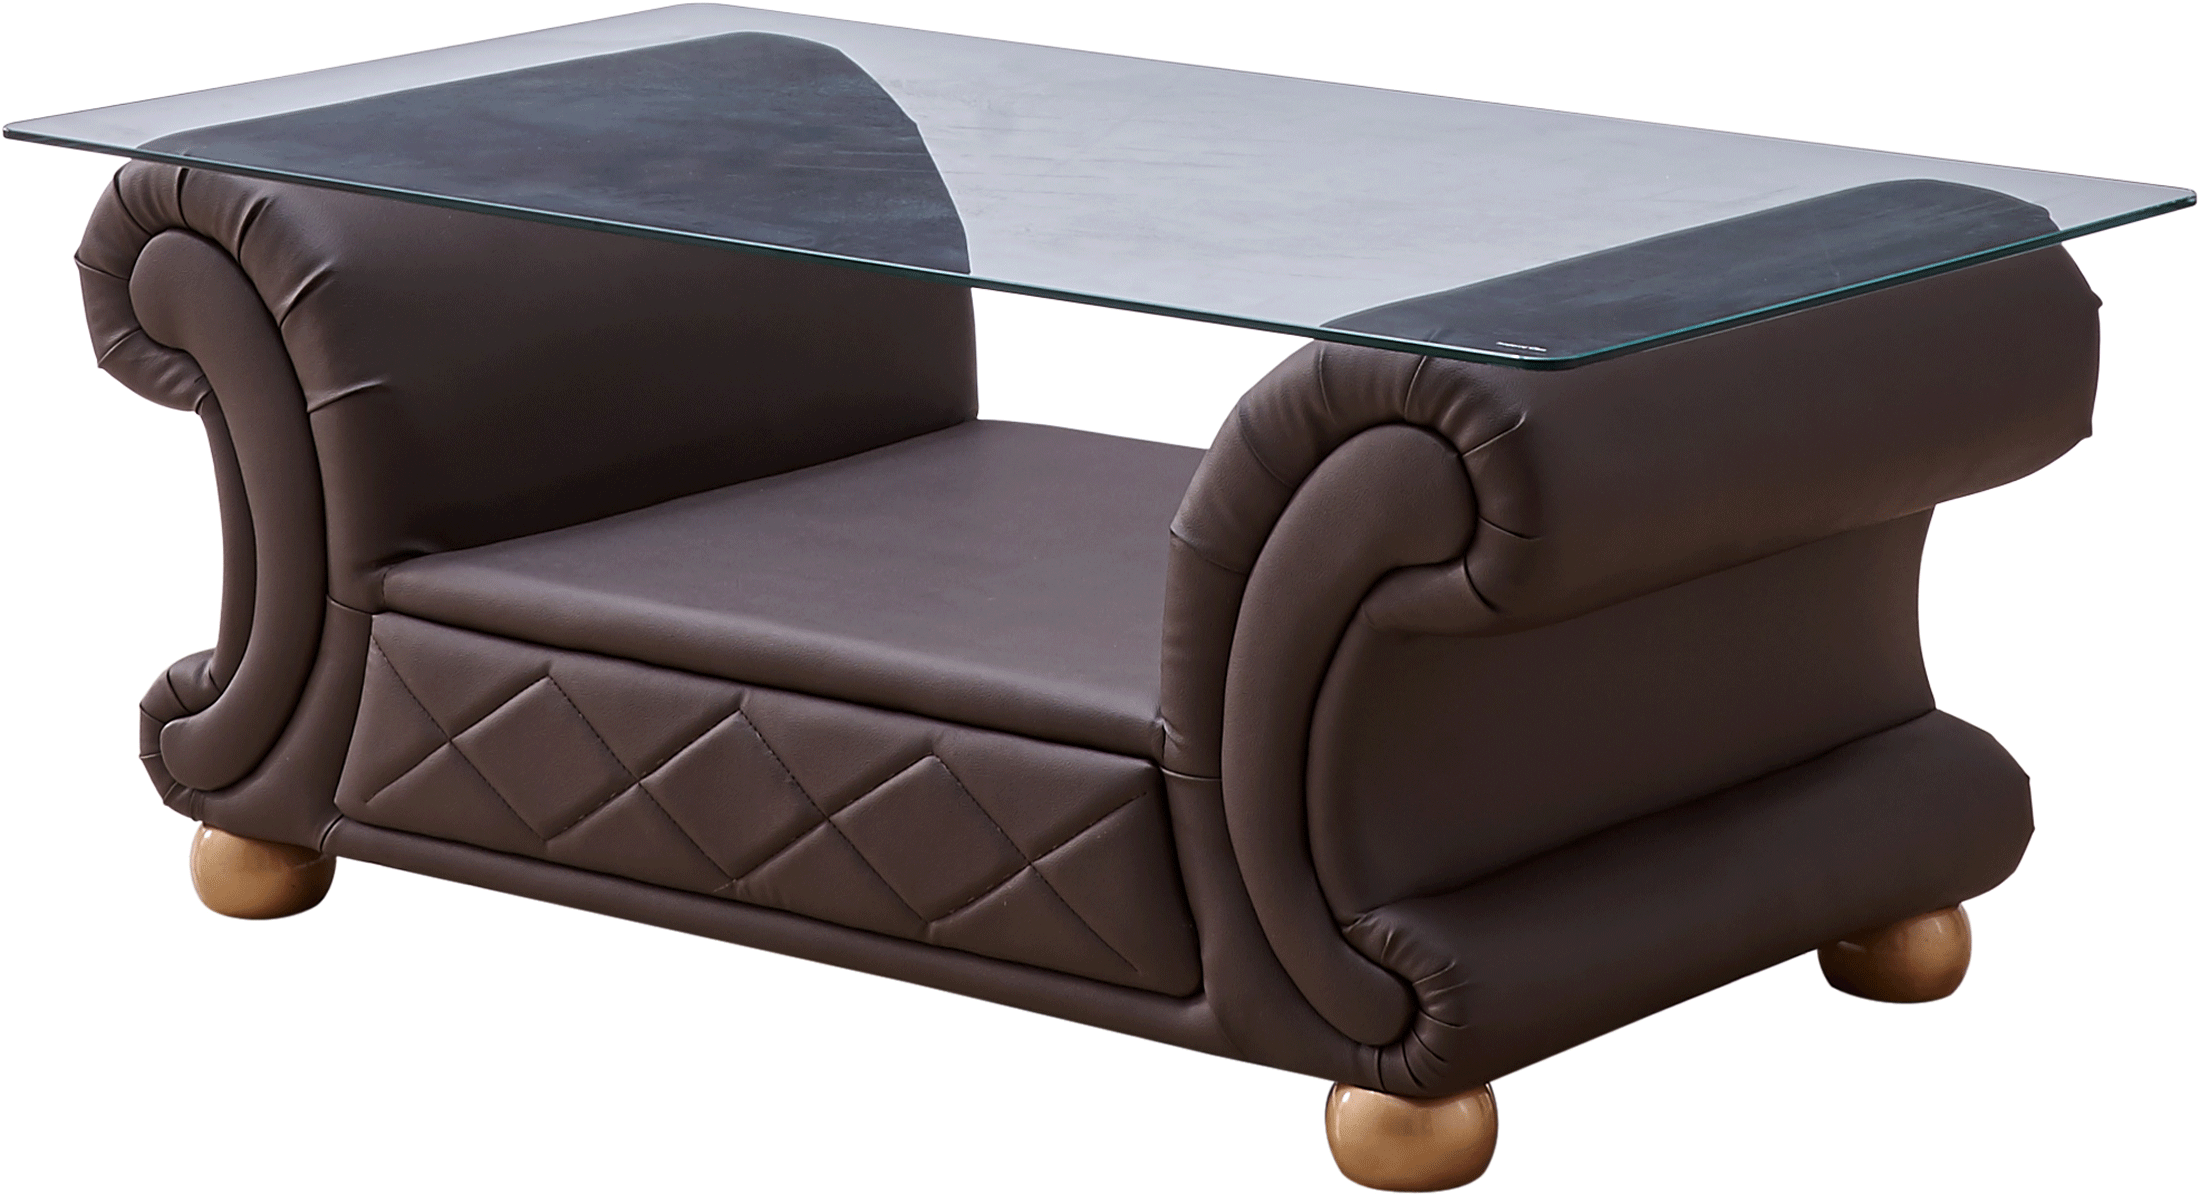 Bedroom Furniture Modern Bedrooms QS and KS Apolo Brown Coffee table